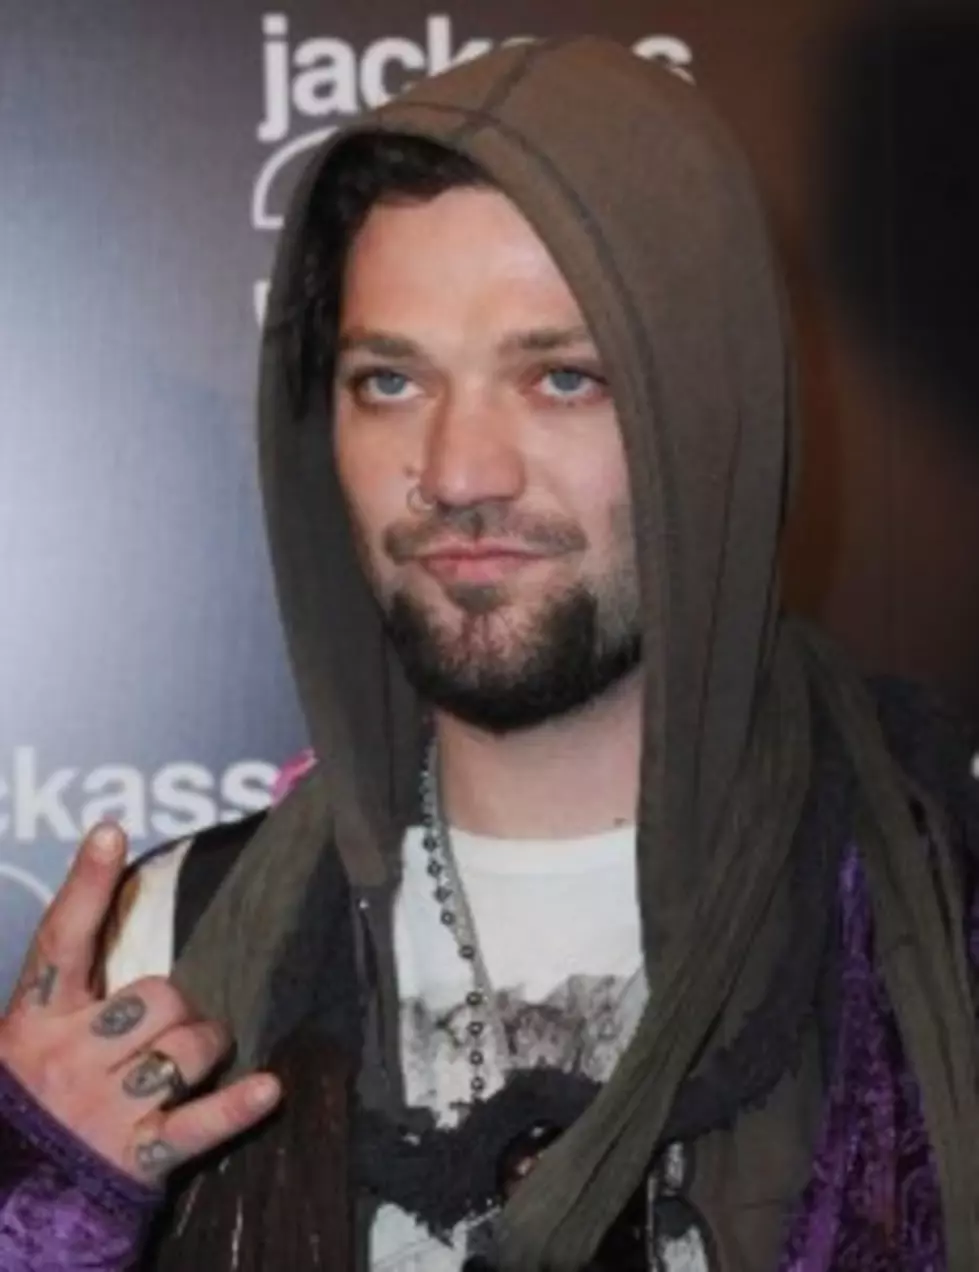 Bam Margera Gets Knocked Out After Confrontation With Woman